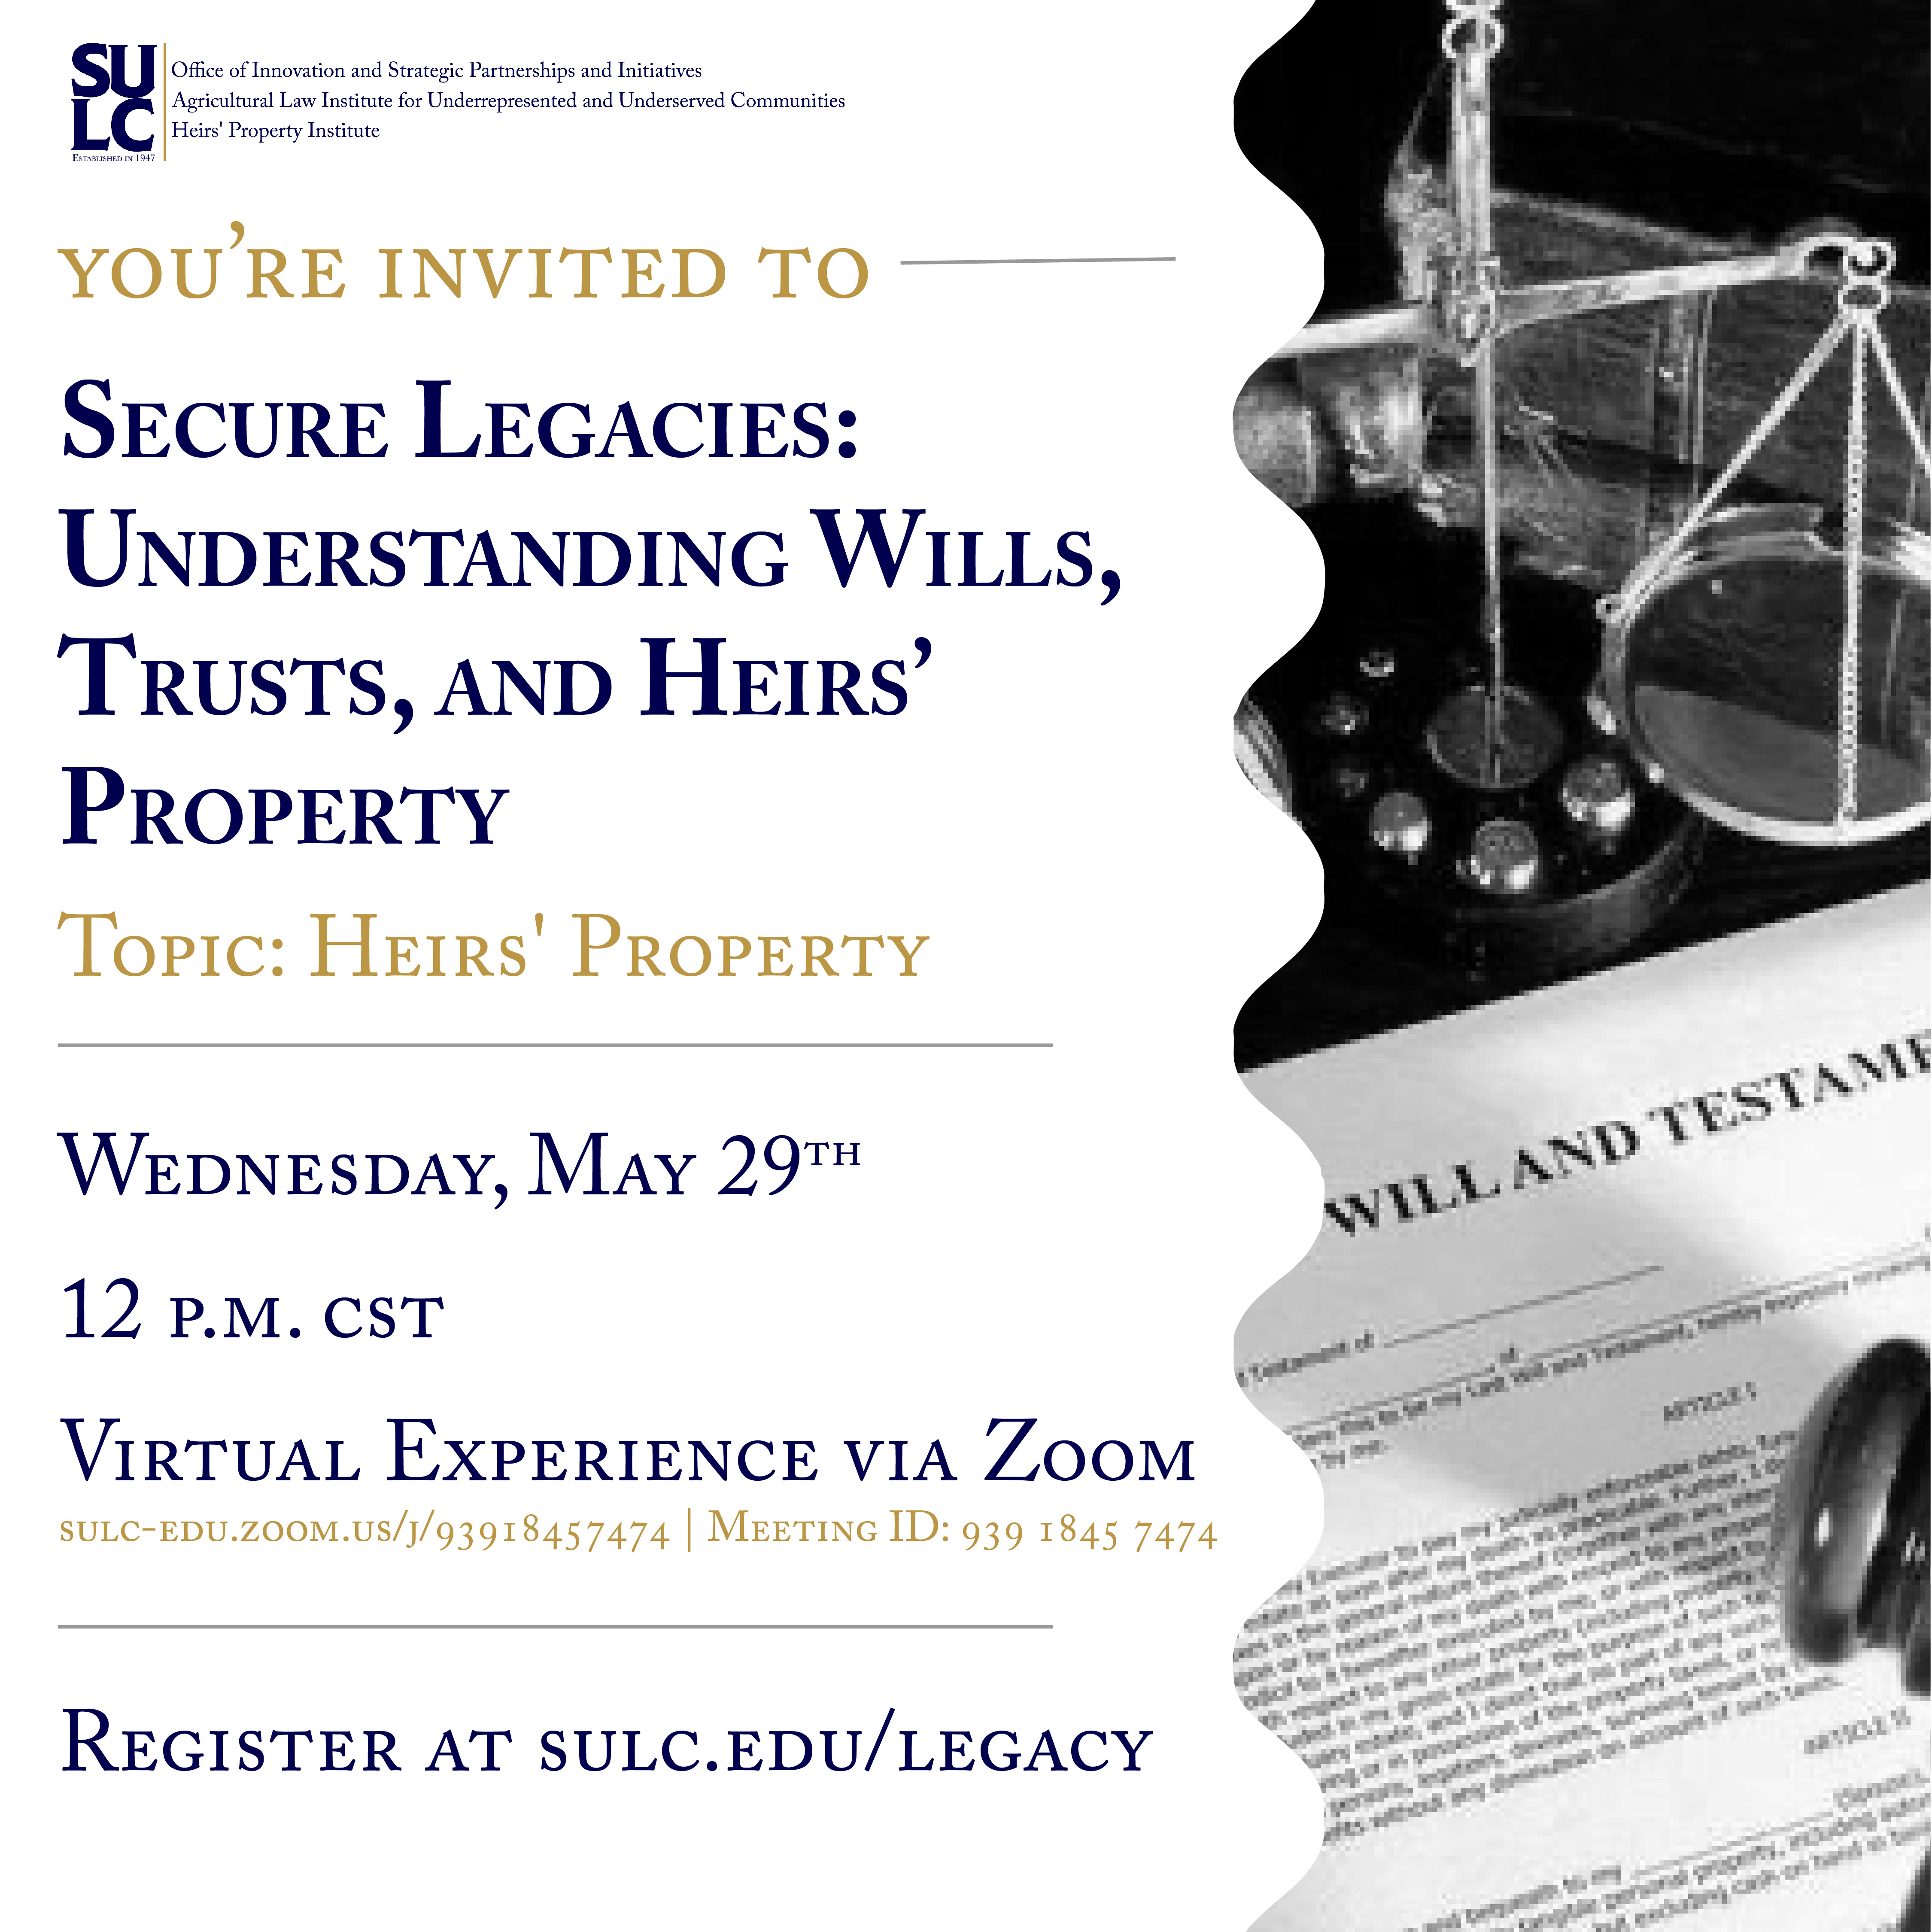 Secure Legacies: Understanding Wills, Trusts, and Heirs' Property